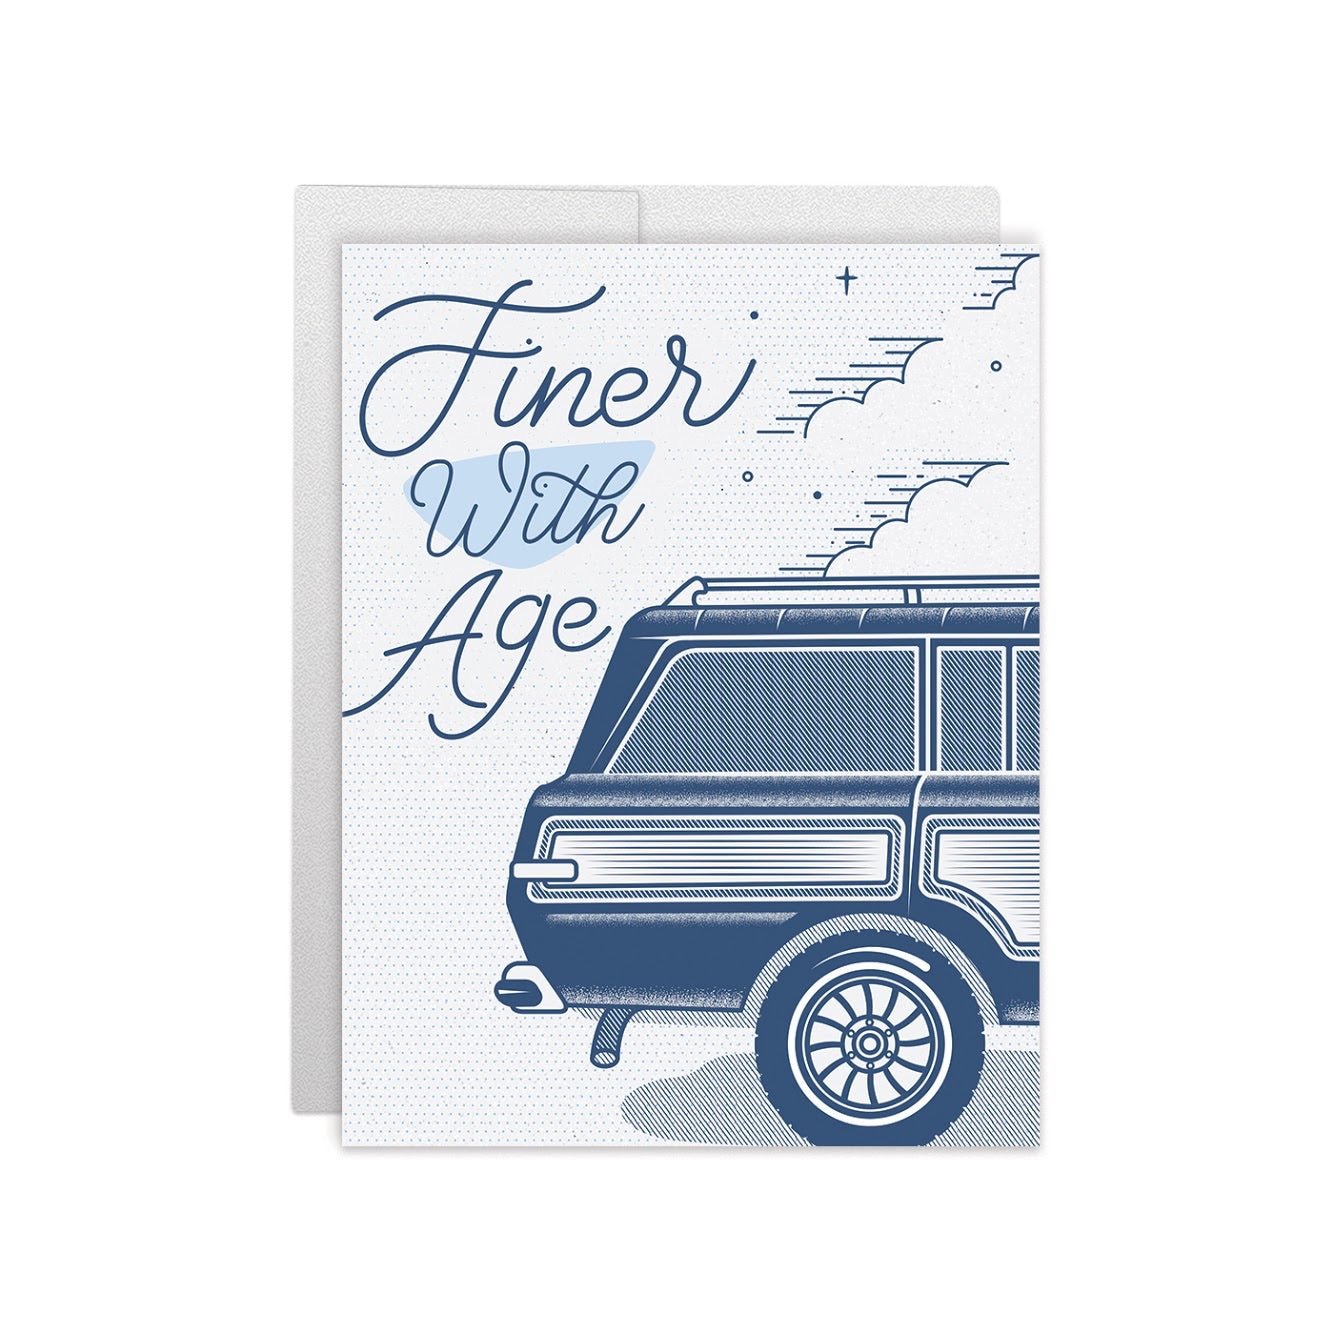 Finer With Age Greeting Card